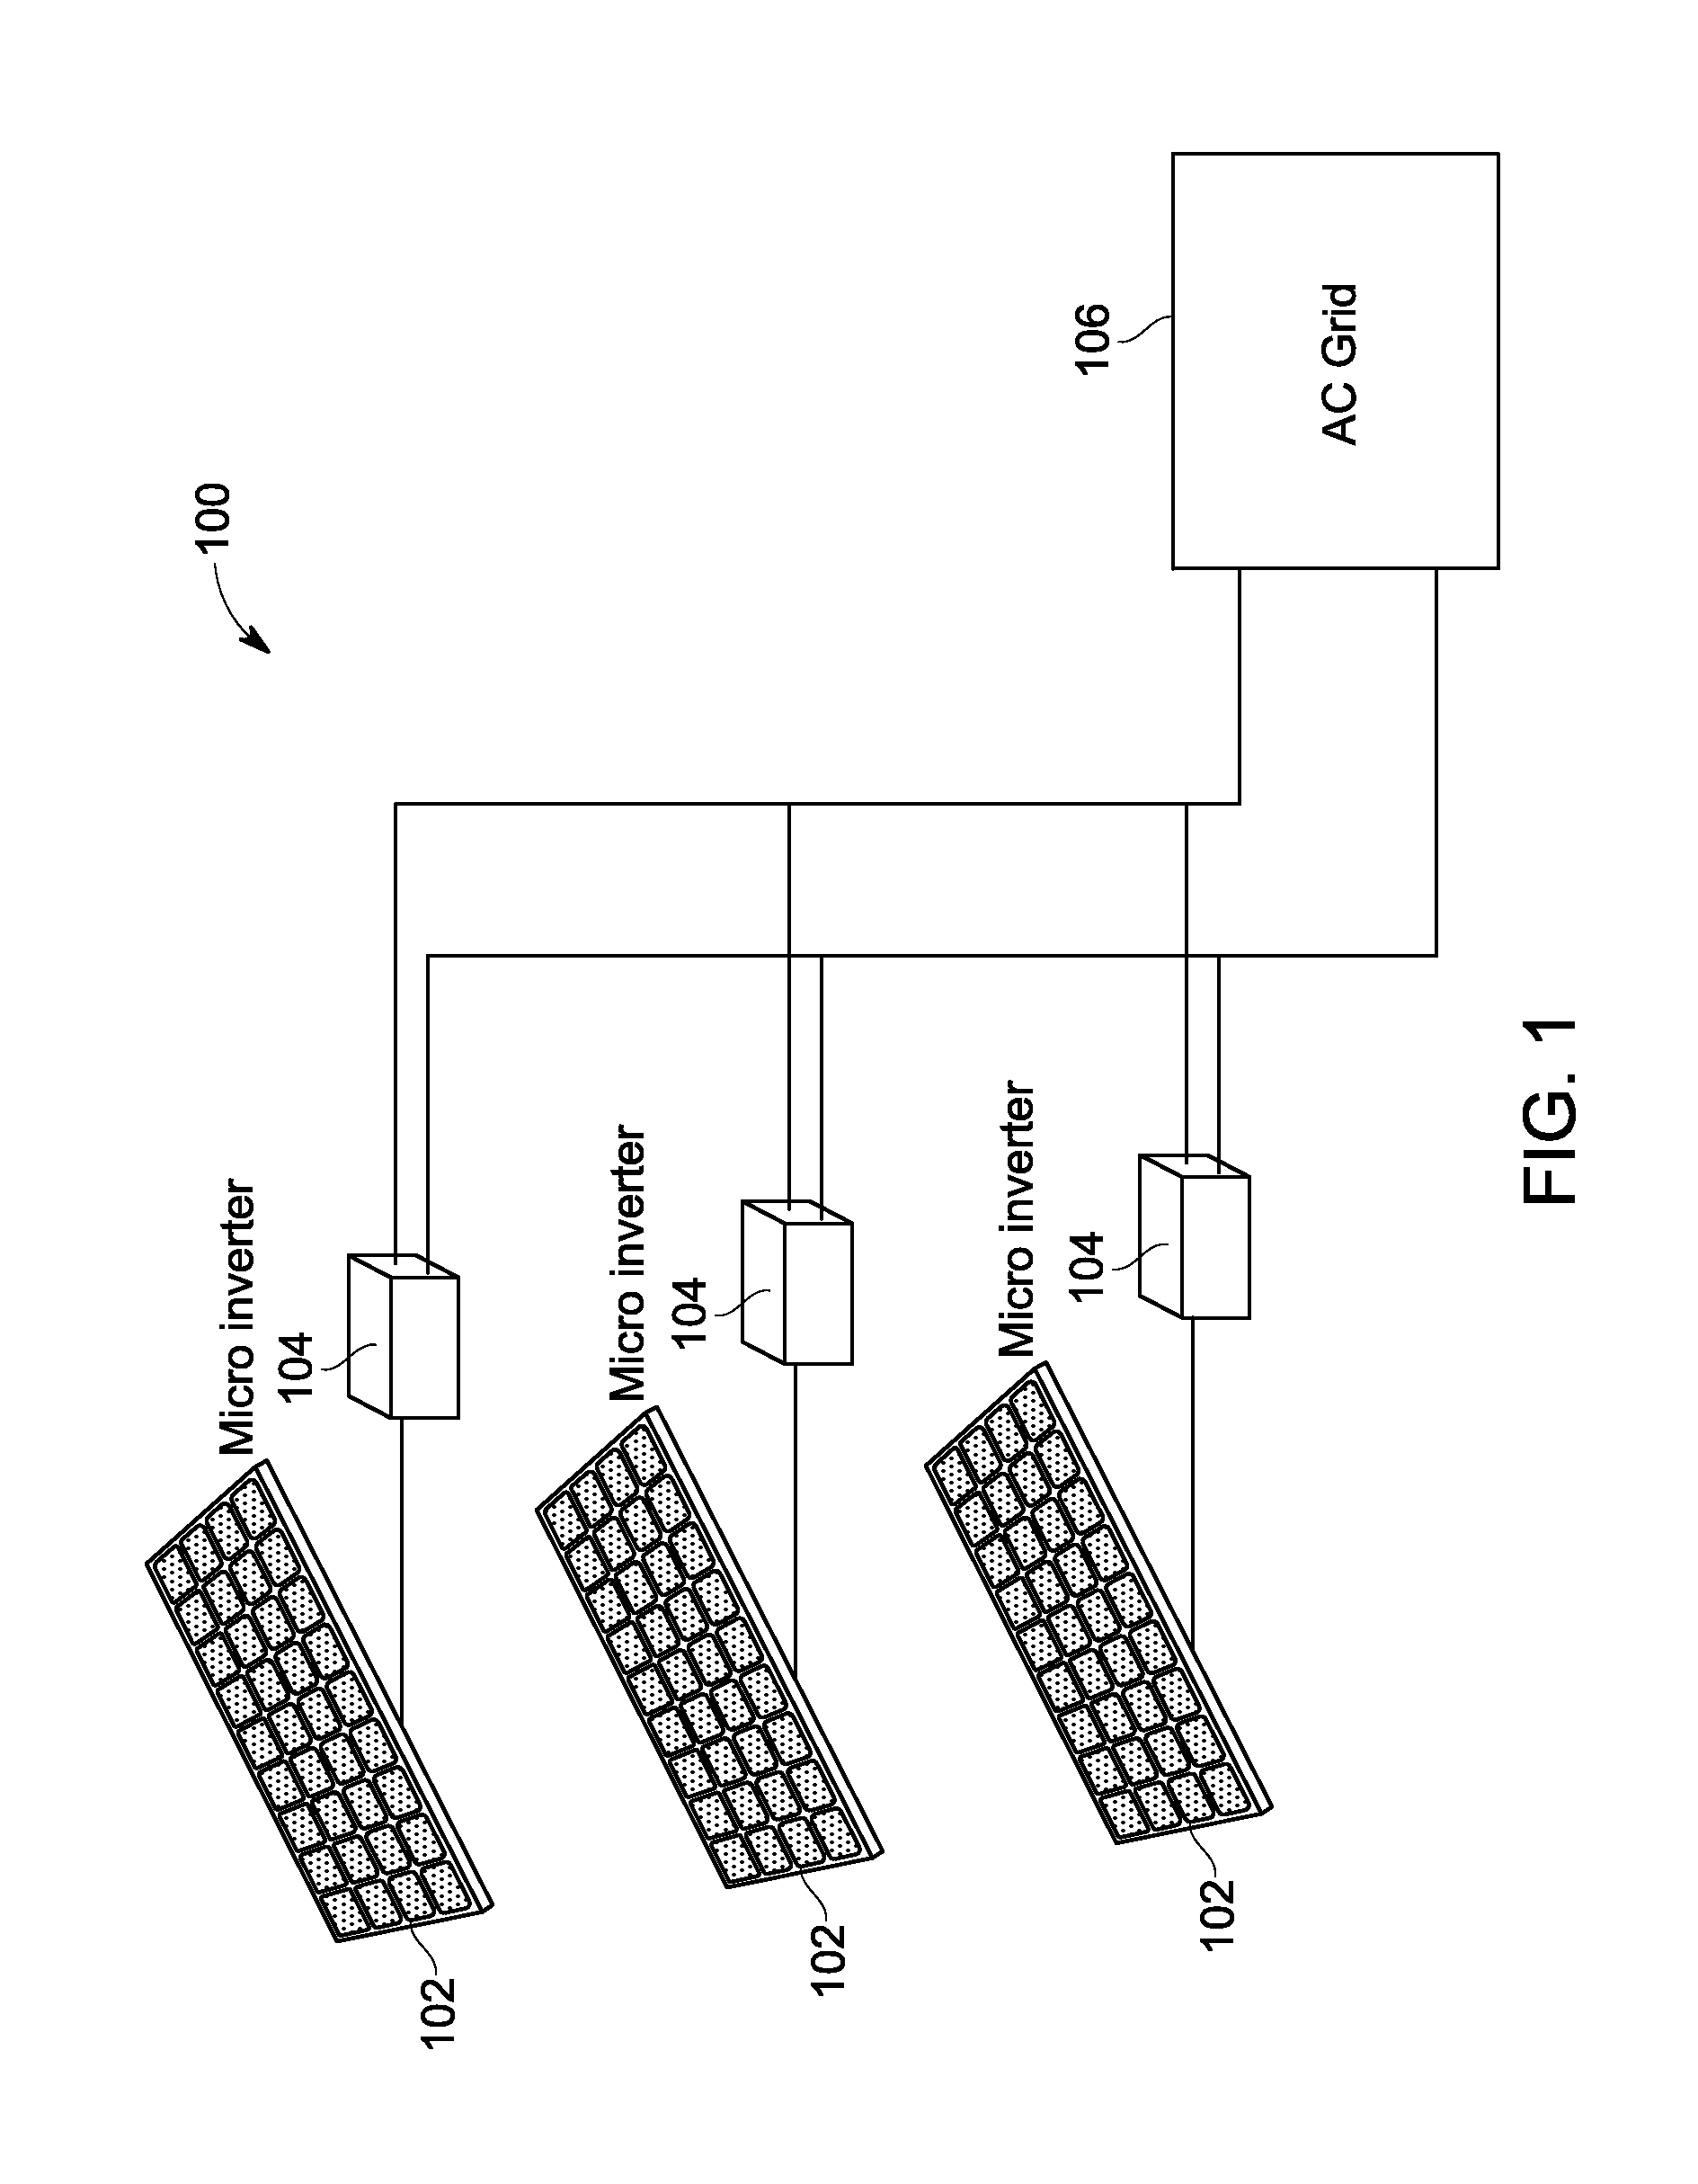 Methods and systems for operating a bi-directional micro inverter